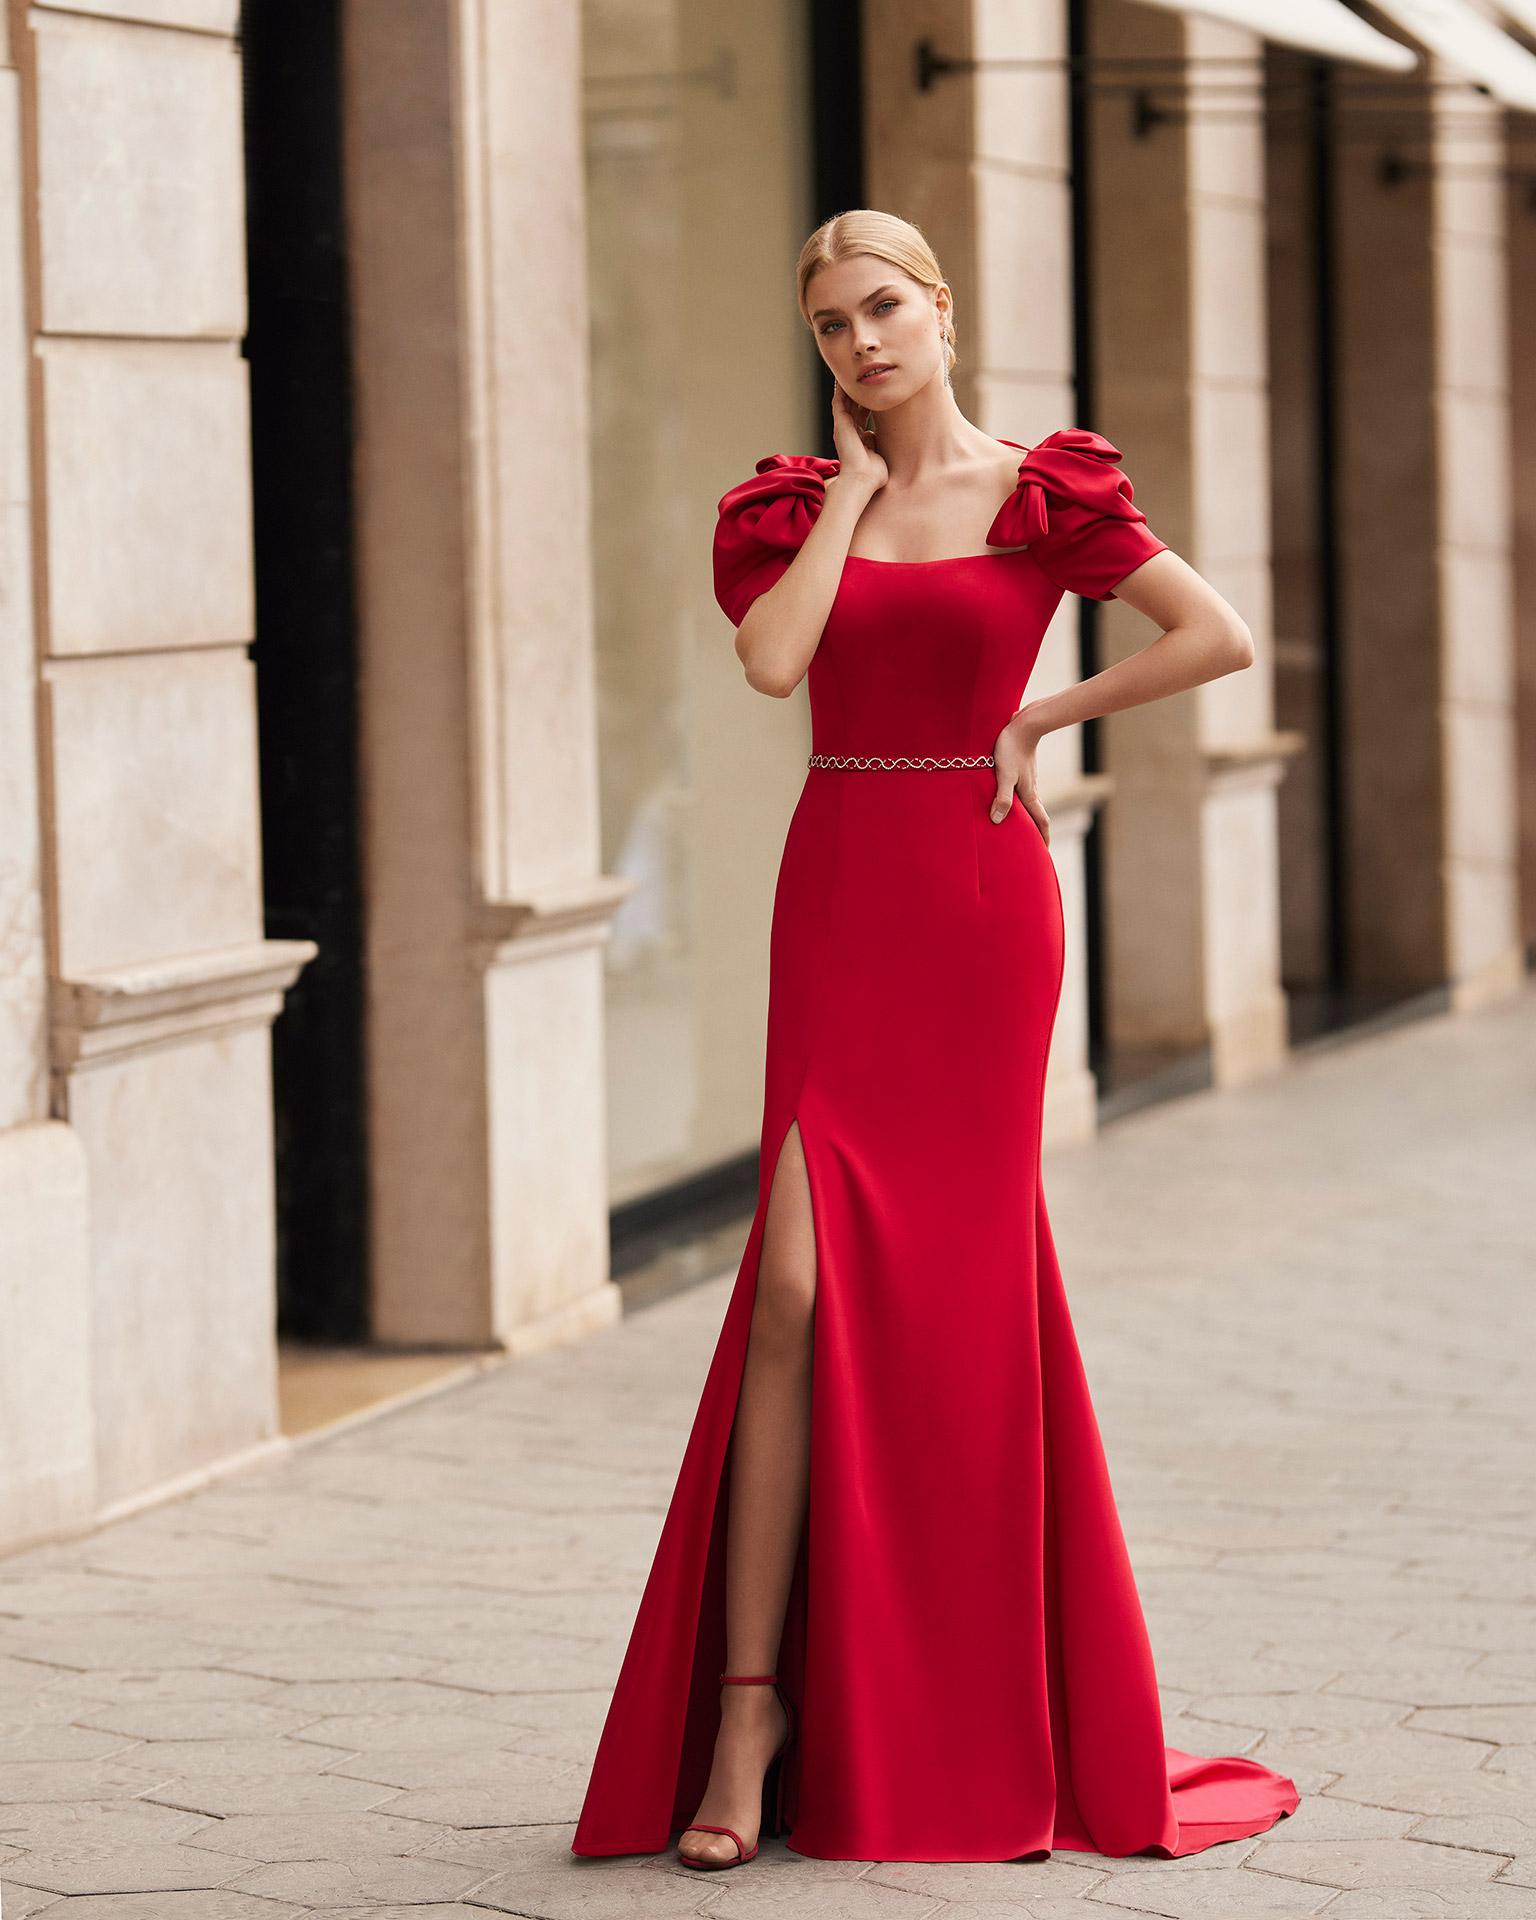 Elegant sheath-style long evening dress, made of satin crepe. Marfil Barcelona design with a strapless neckline, a beadwork belt, and short puffed sleeves. MARFIL_BARCELONA.